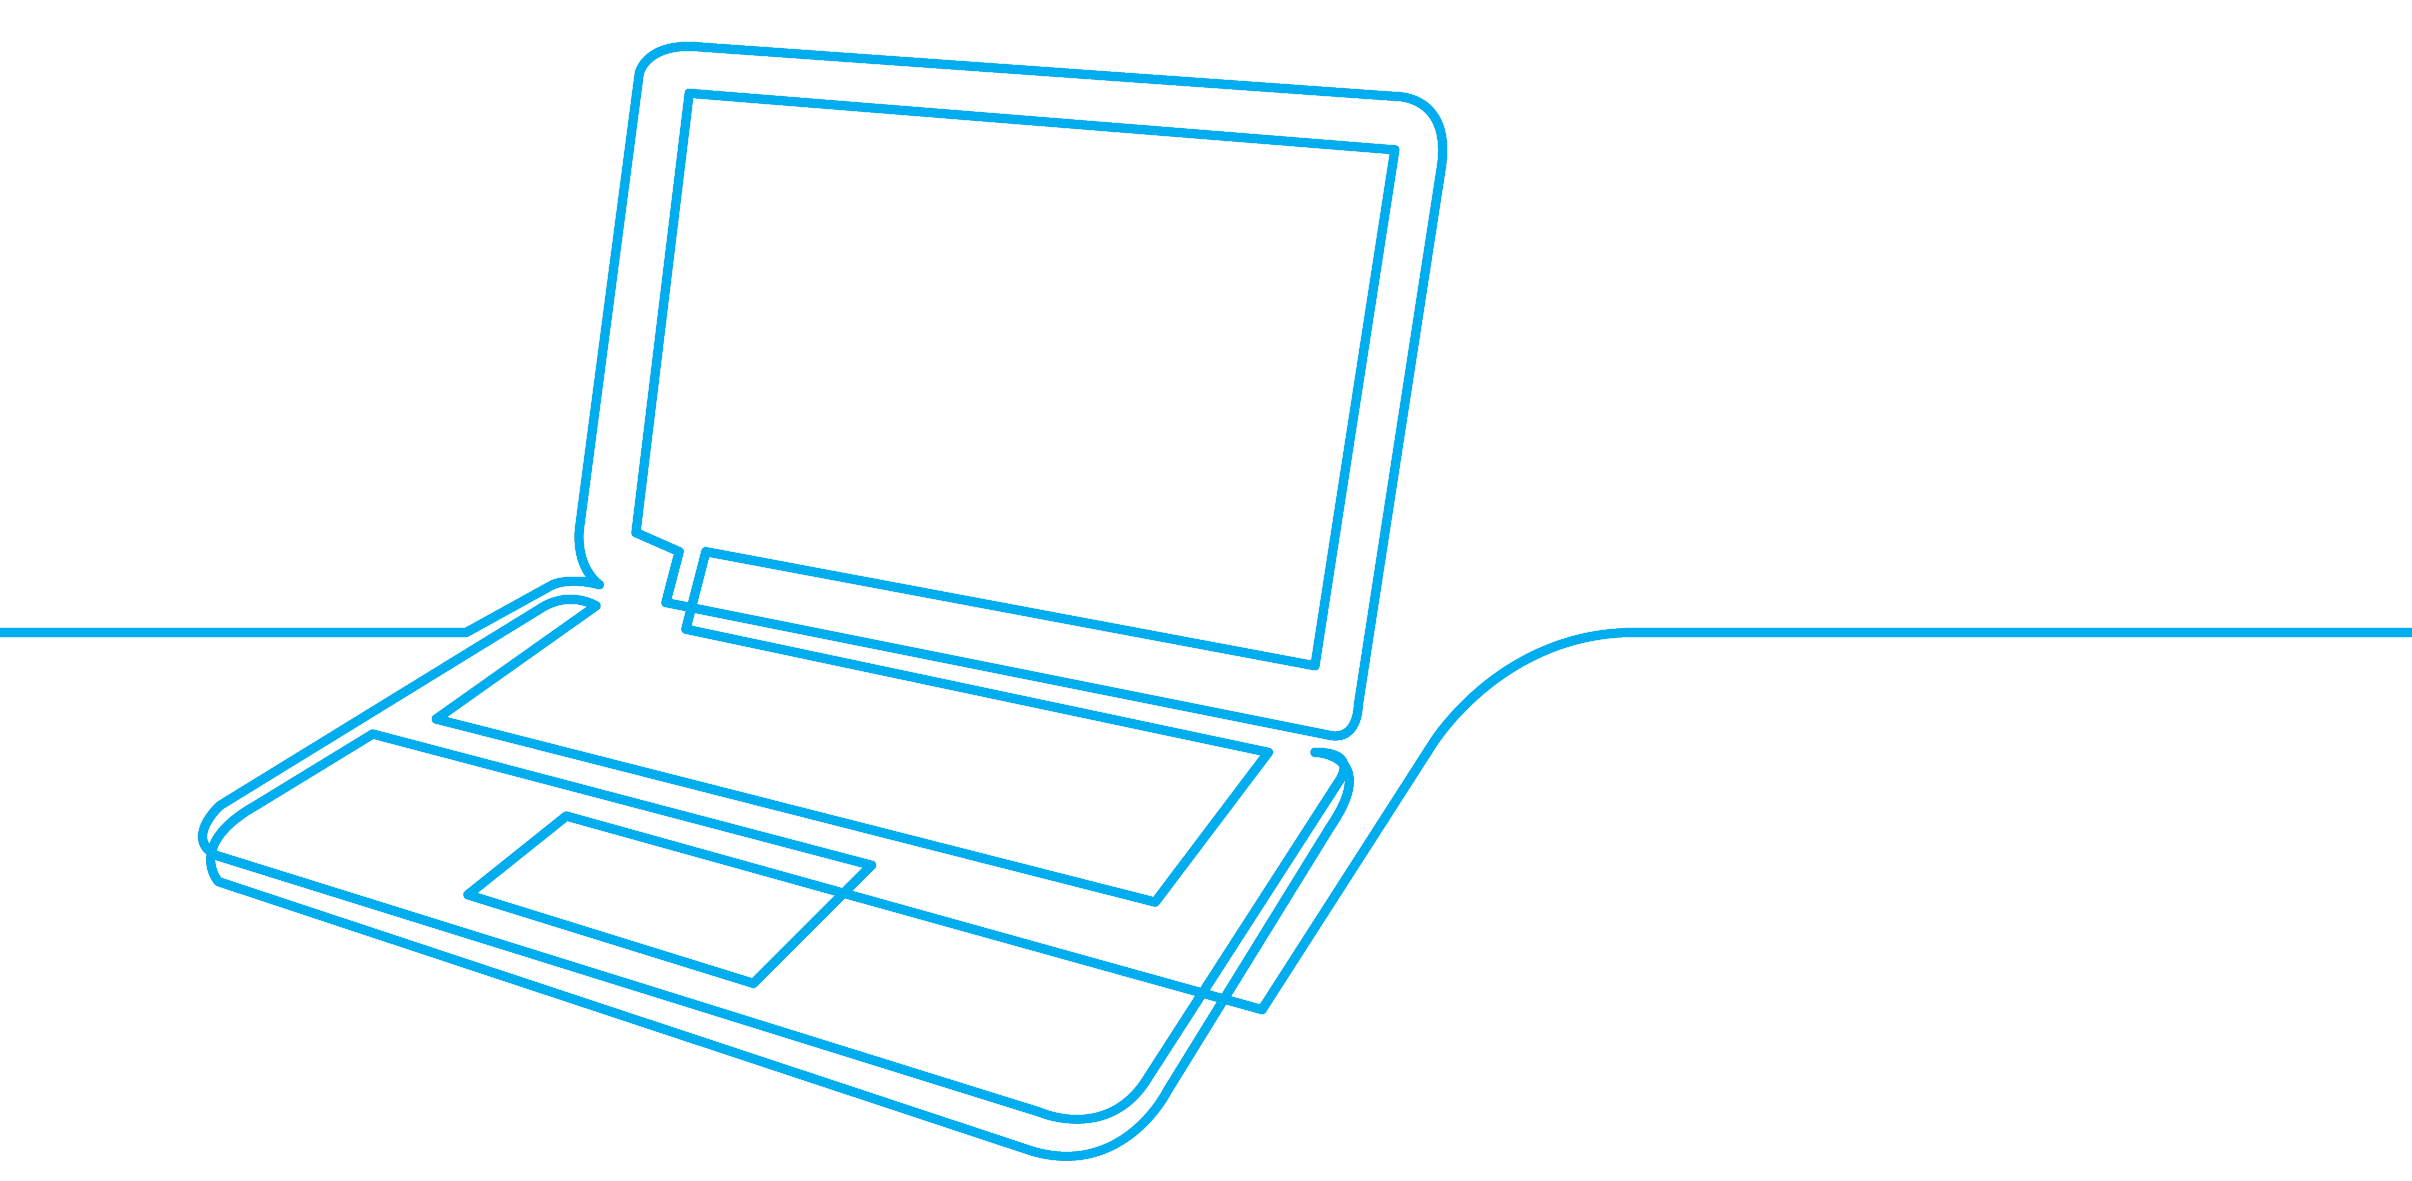 Line drawing of a laptop